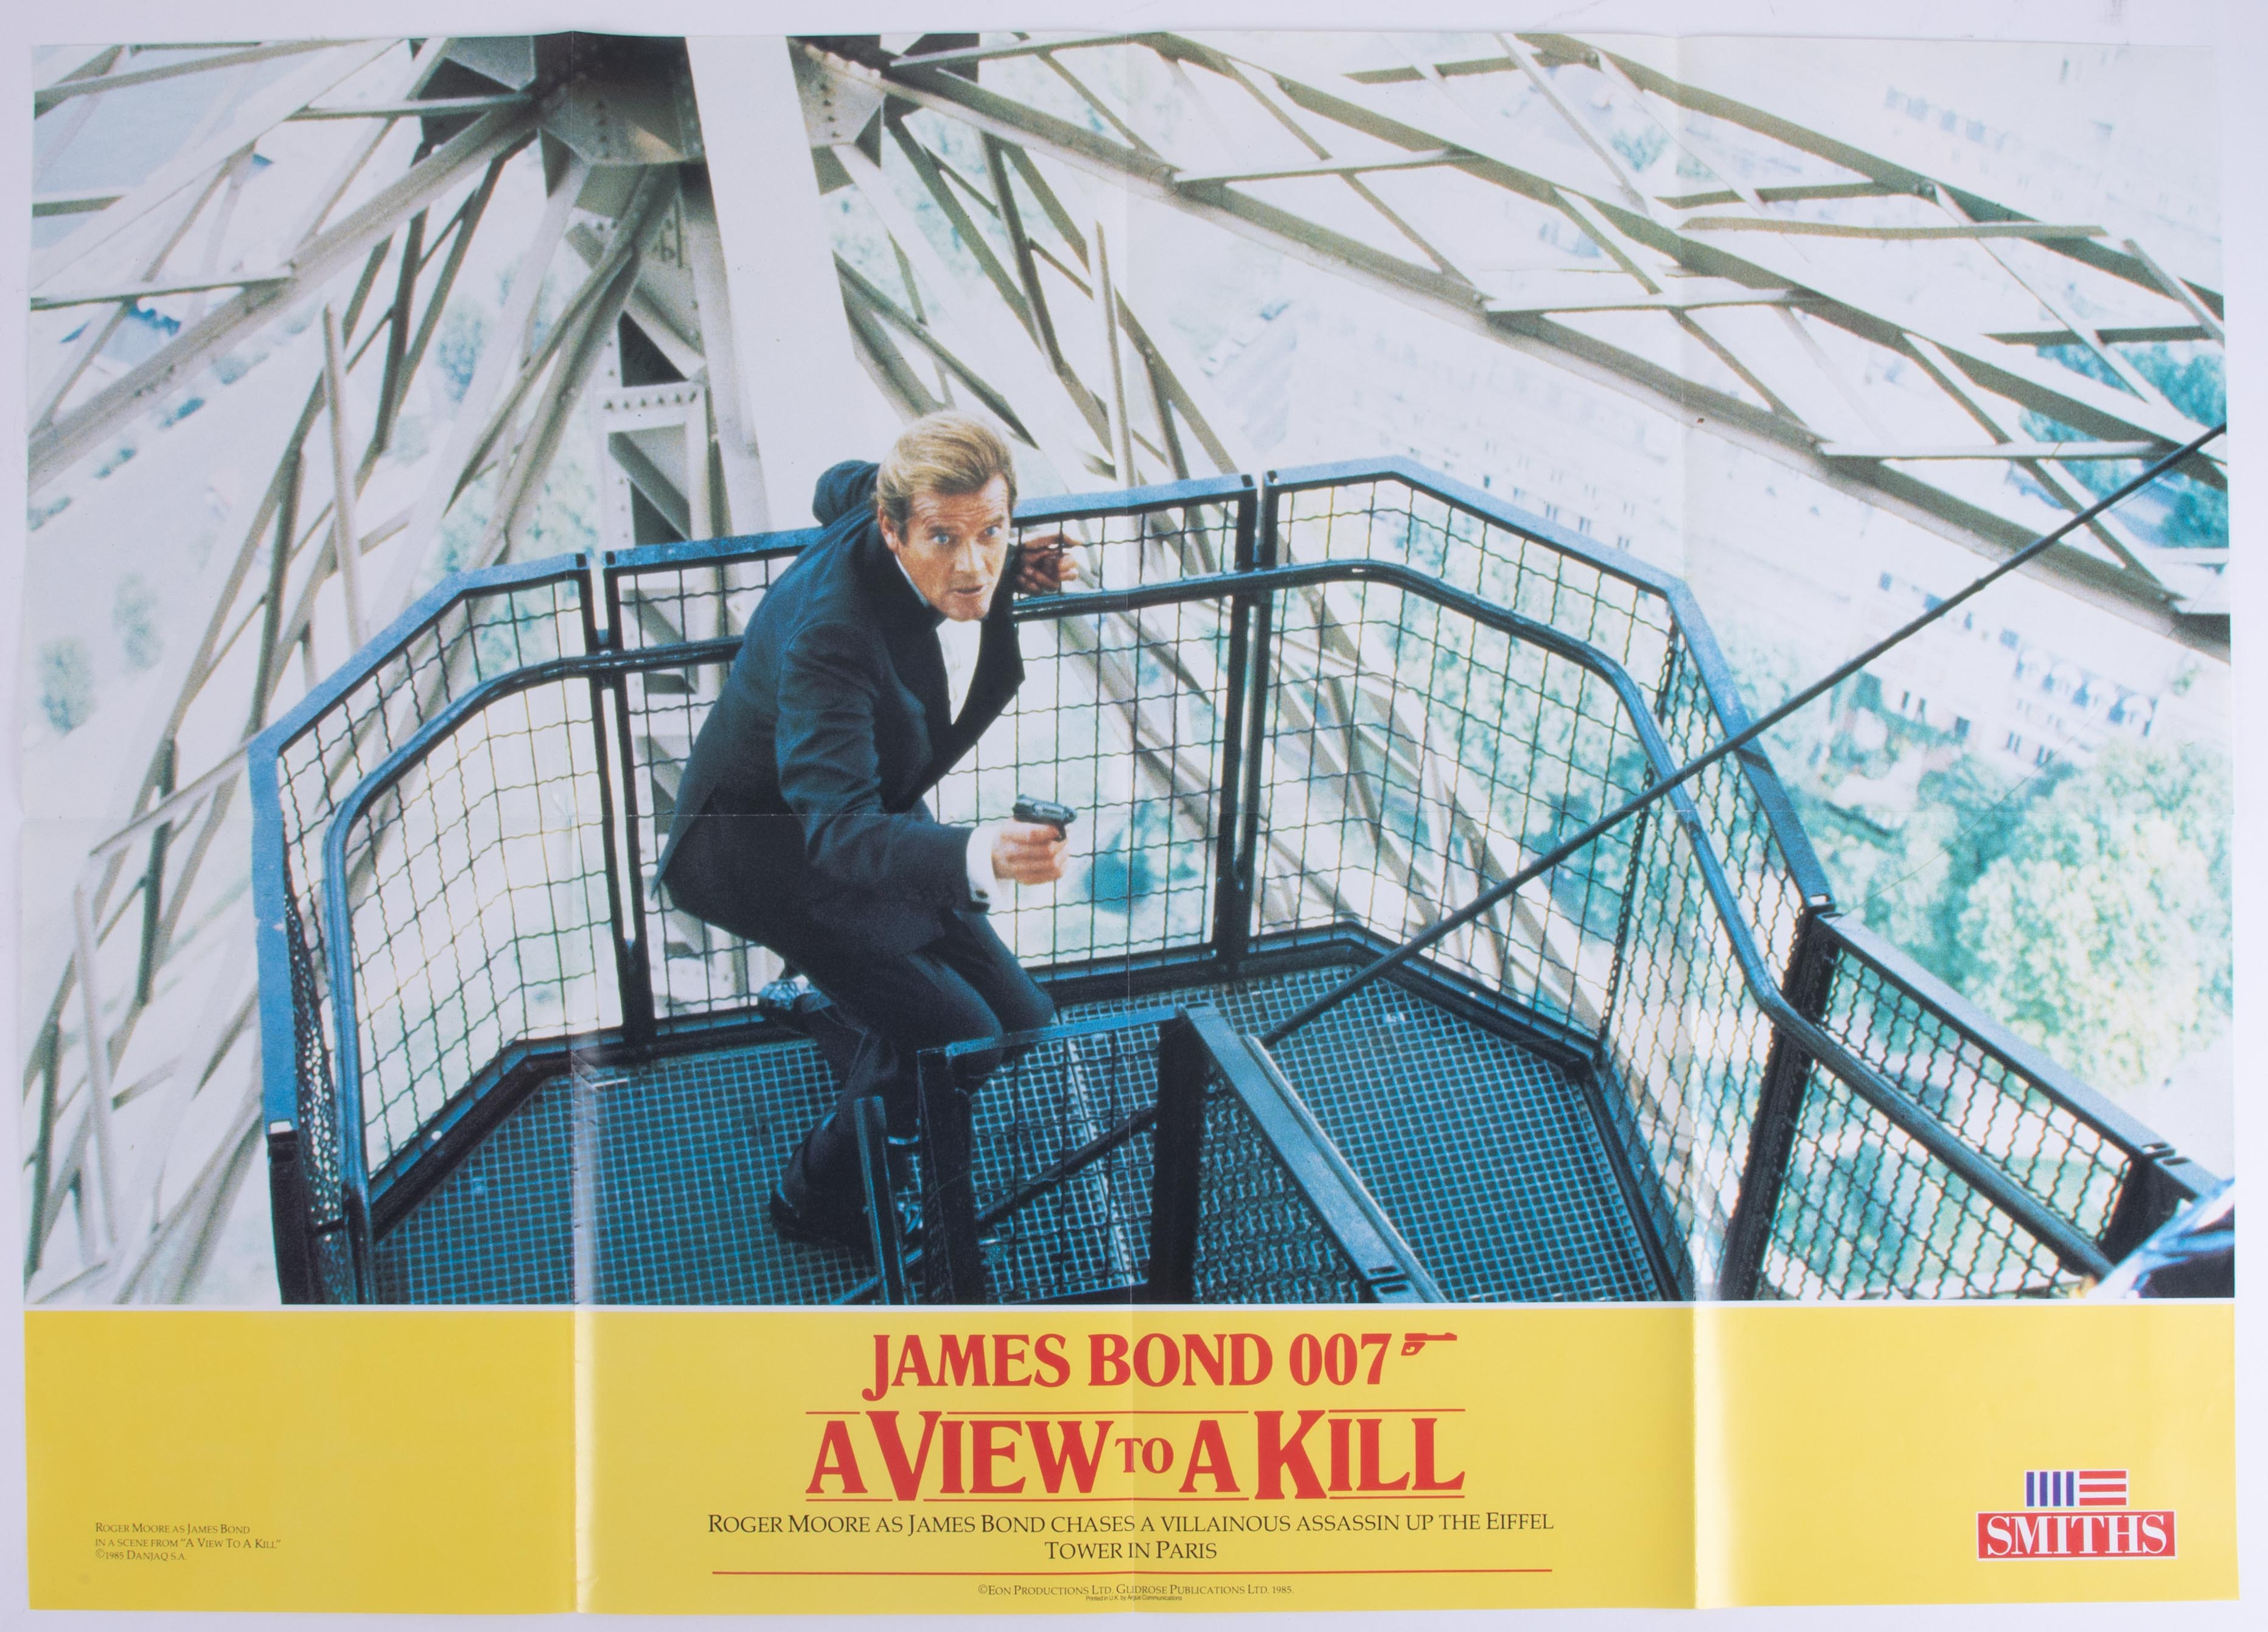 James Bond 007, View To A Kill, Smiths crisps poster 007, together with fold out poster magazine, - Image 5 of 5